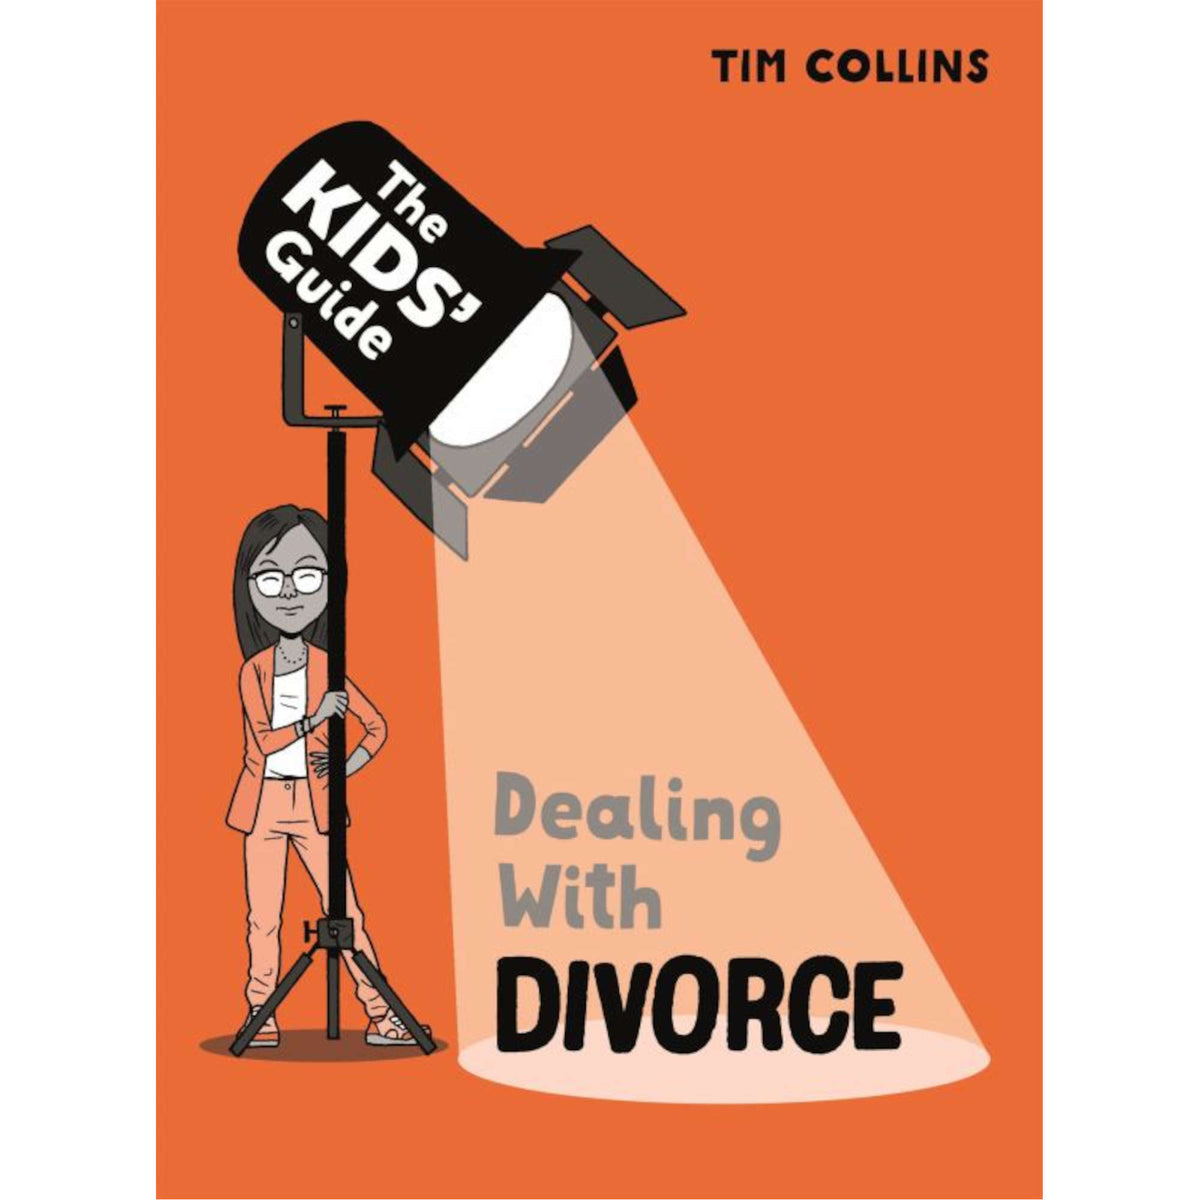 The Kids' Guide: Dealing with Divorce